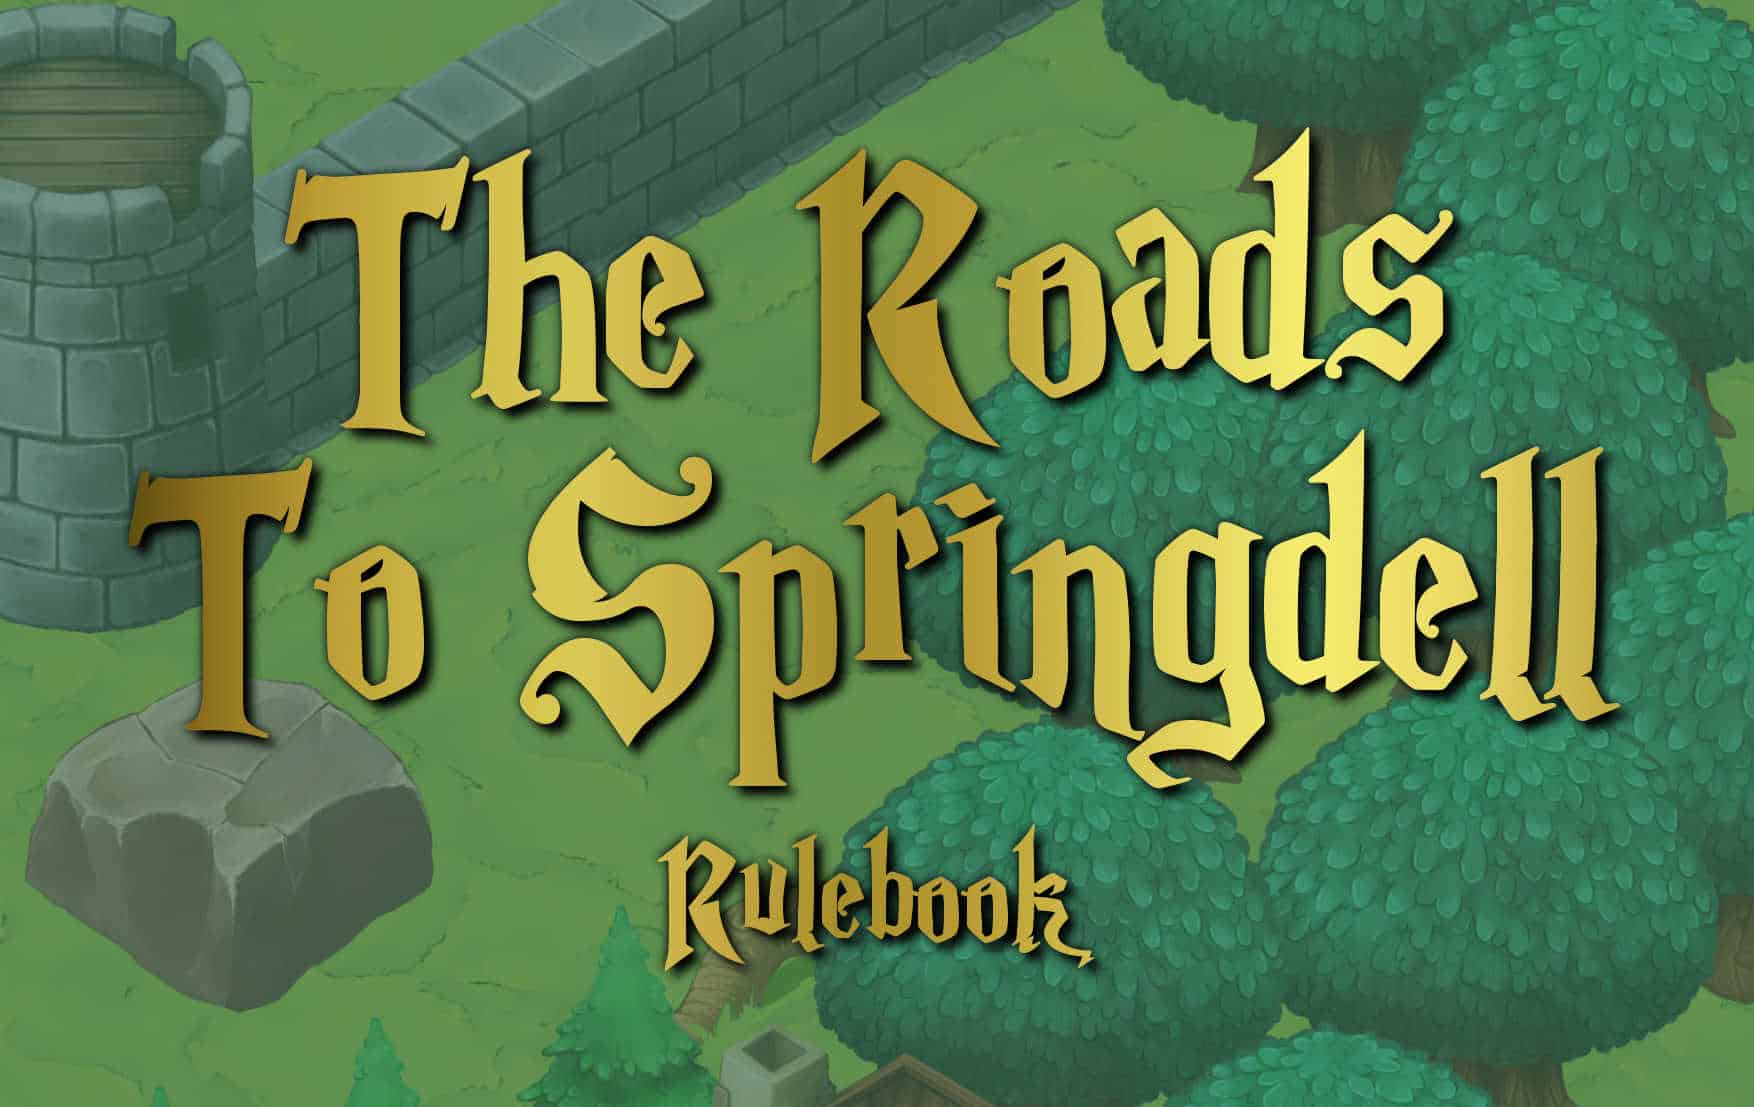 The Roads to Springdell rulebook title